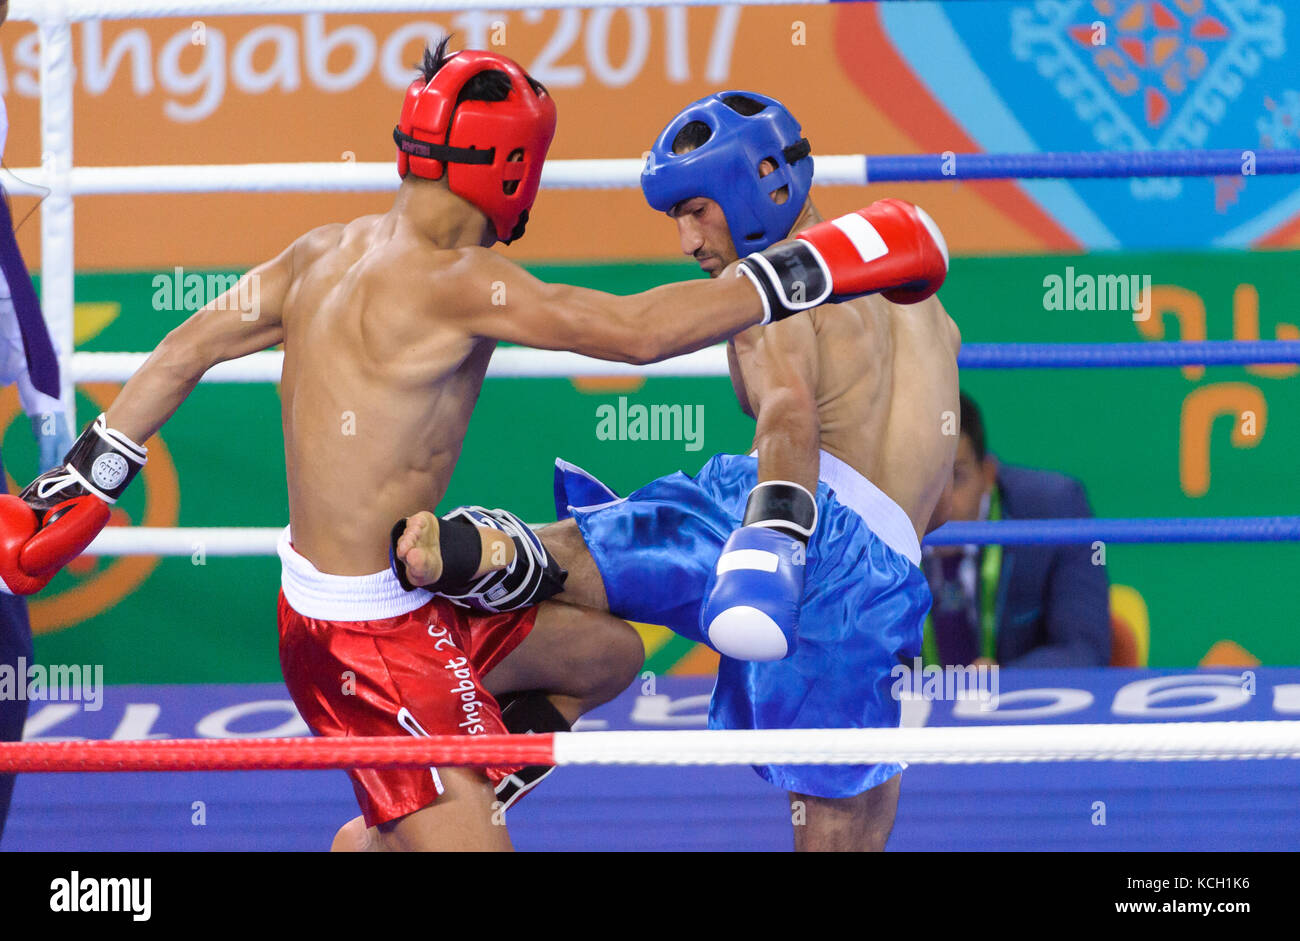 Kickboxing High Resolution Stock Photography and Images - Alamy